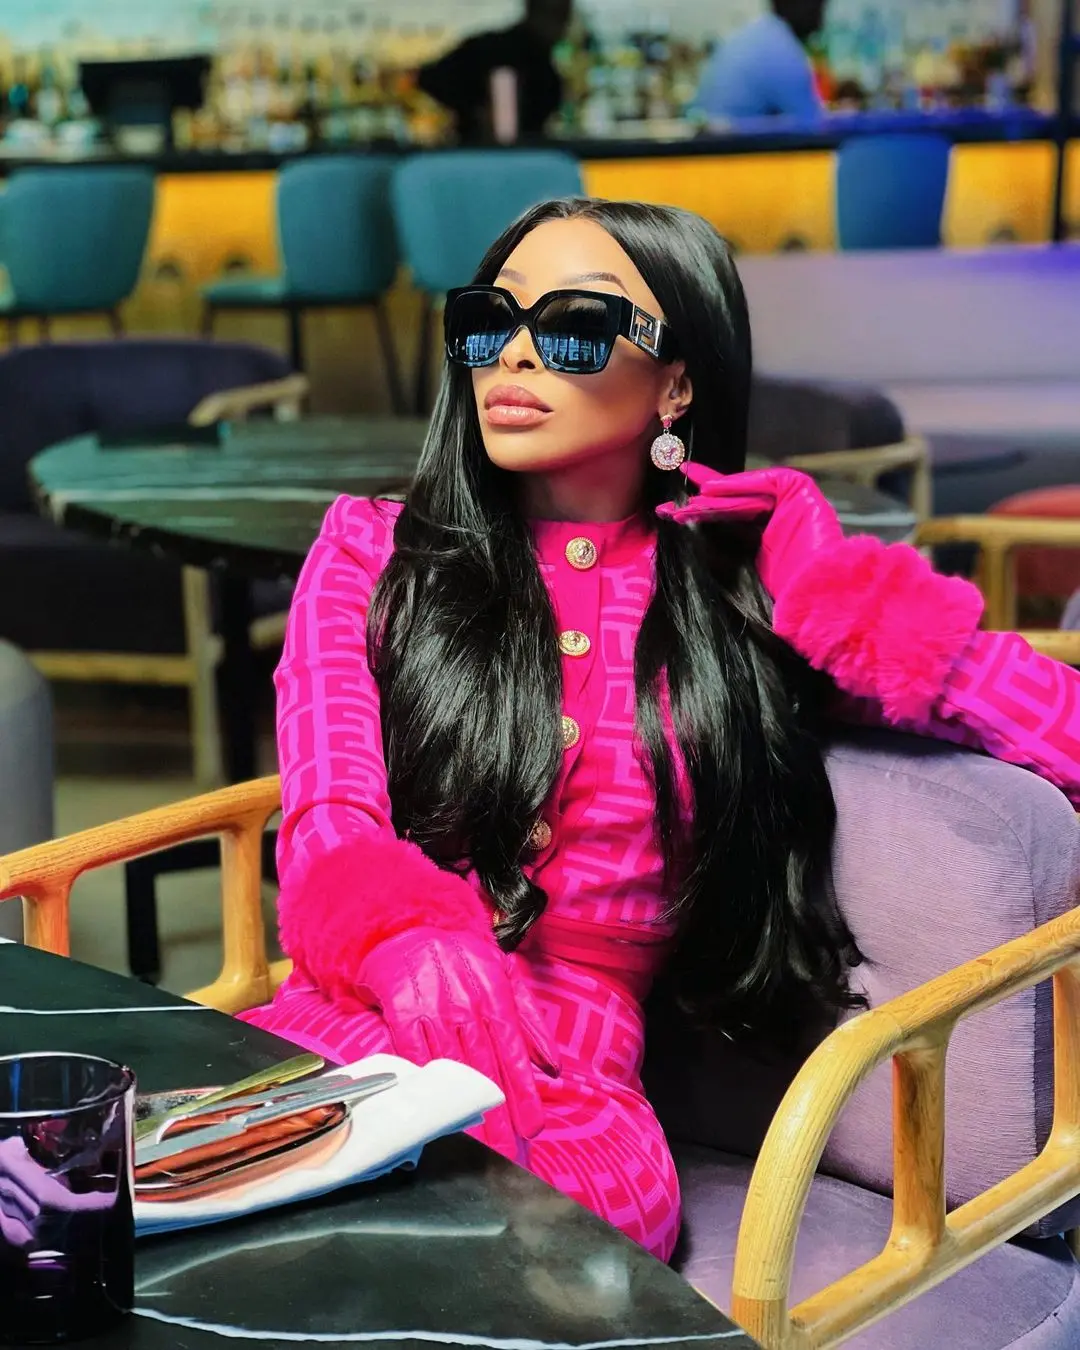 Photos: Actress Khanyi Mbau shows off her new hands